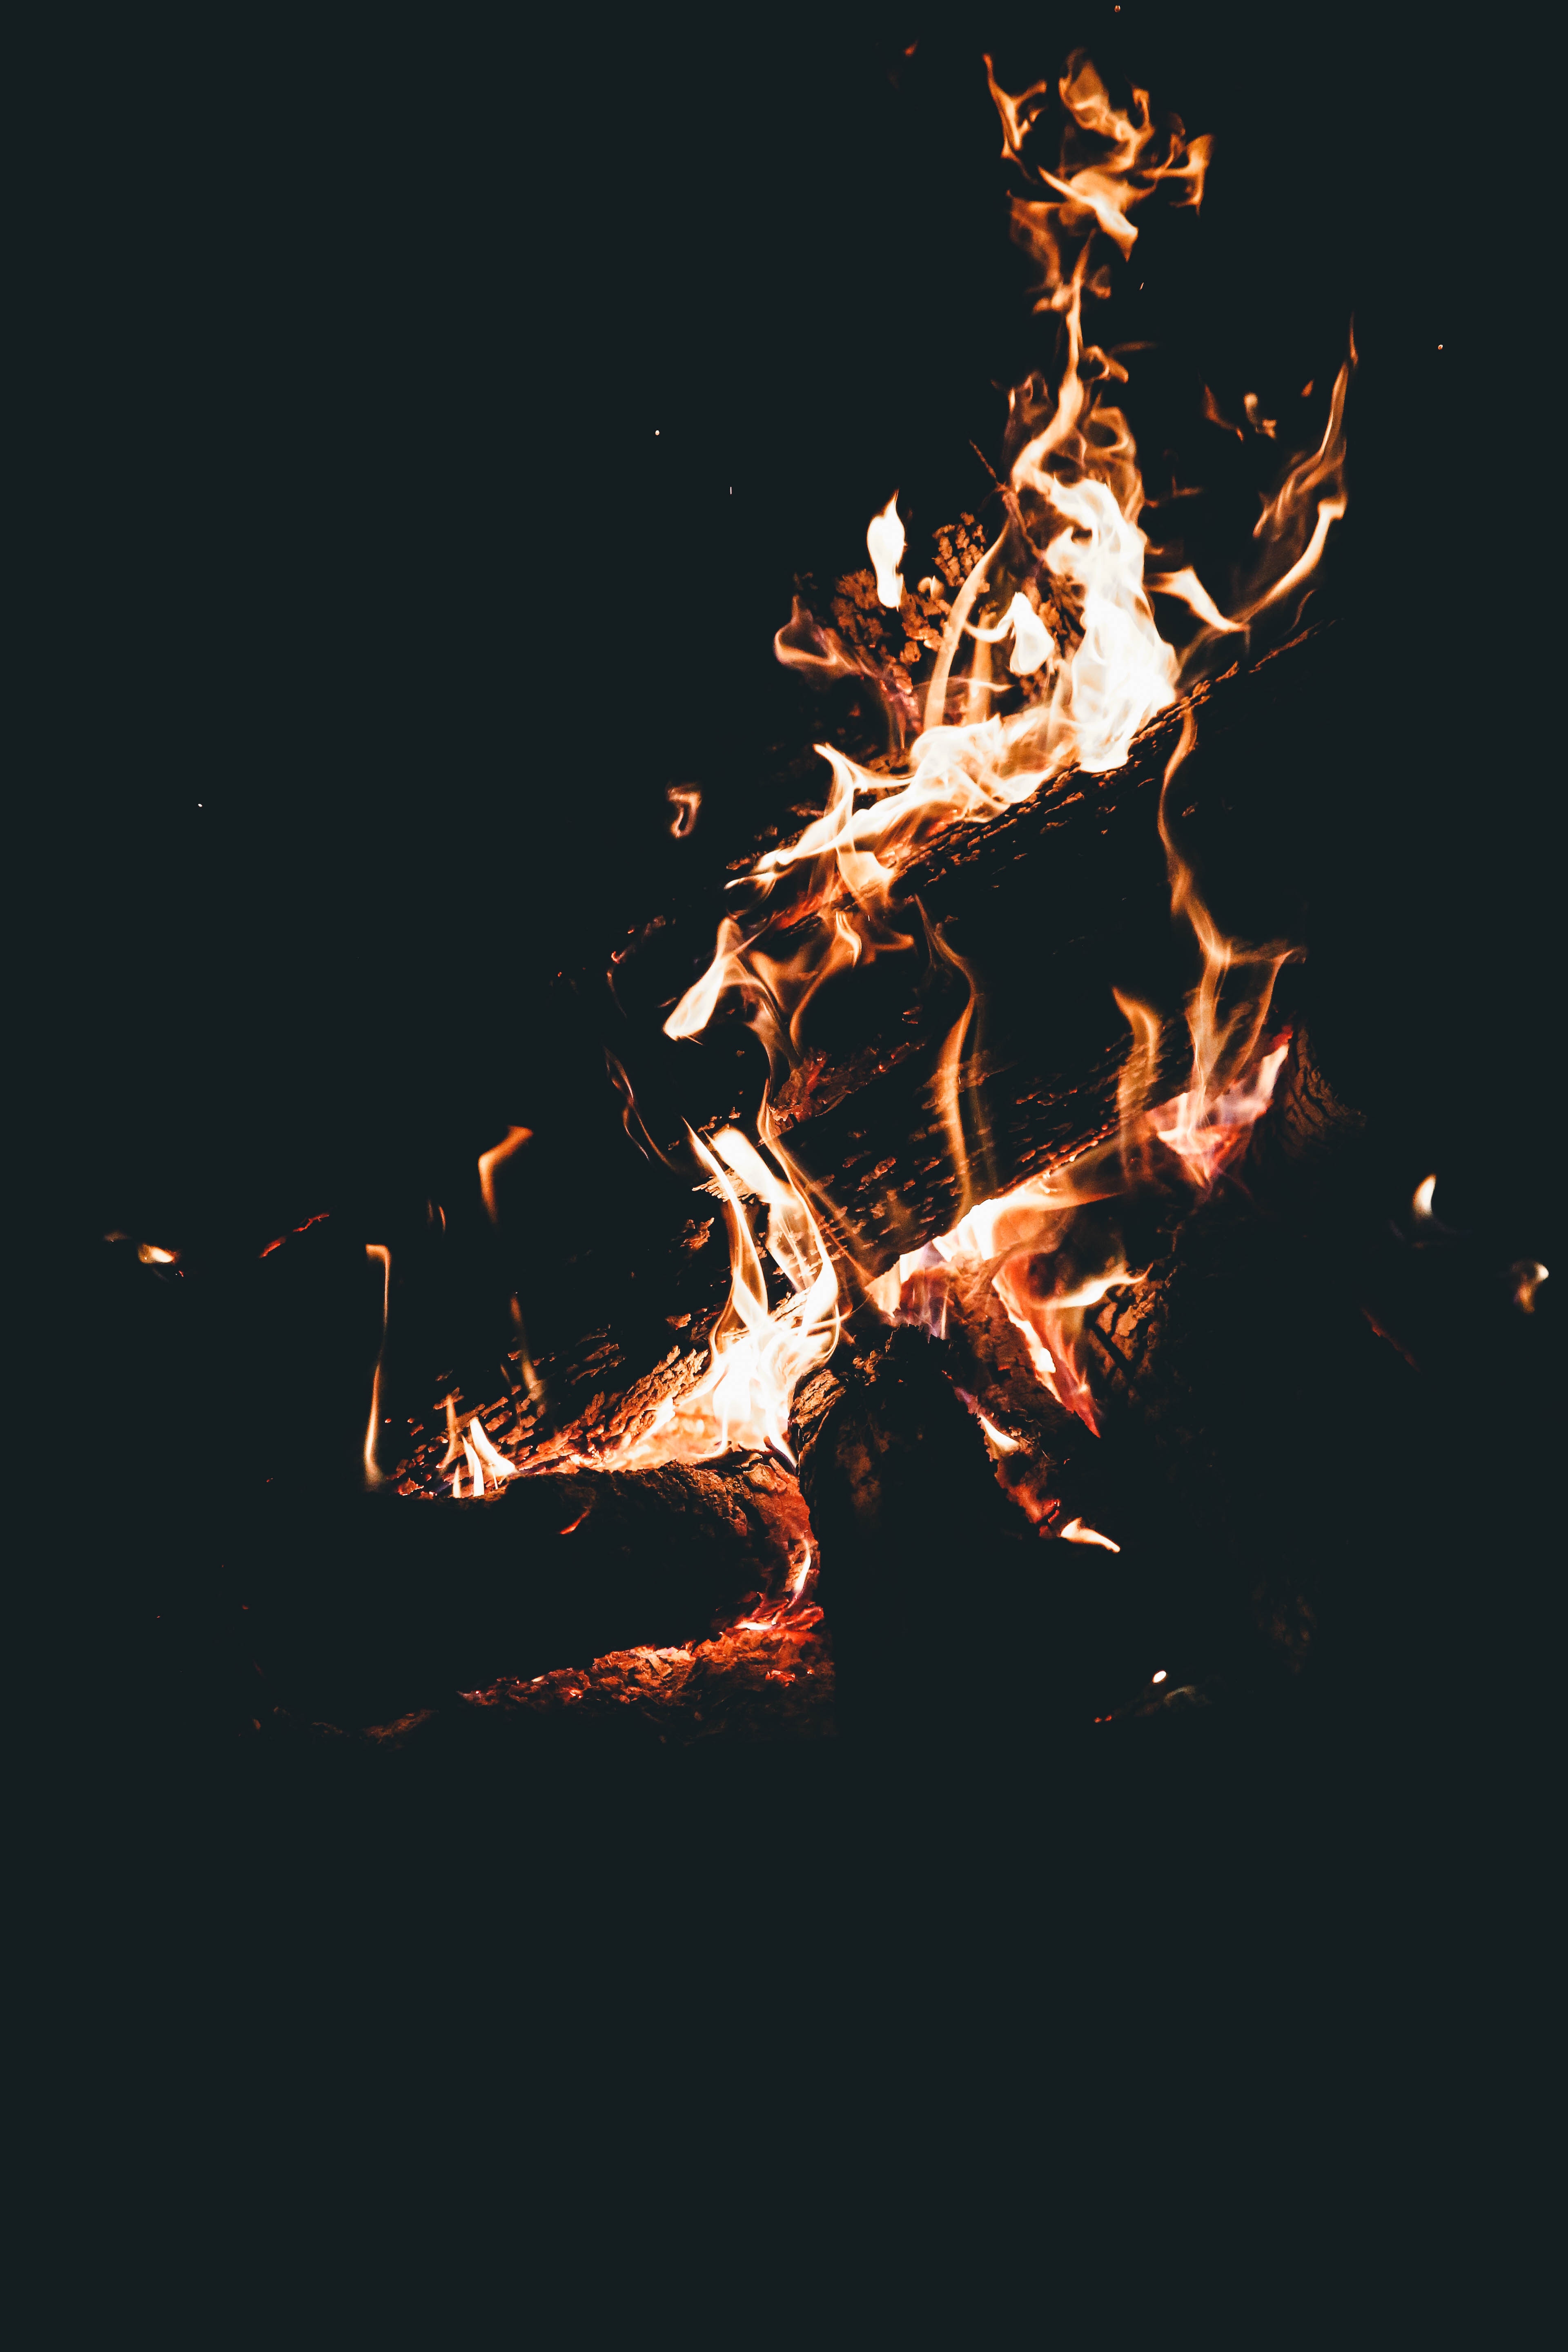 flame, bonfire, dark, fire, firewood, camping, campsite, combustion wallpaper for mobile